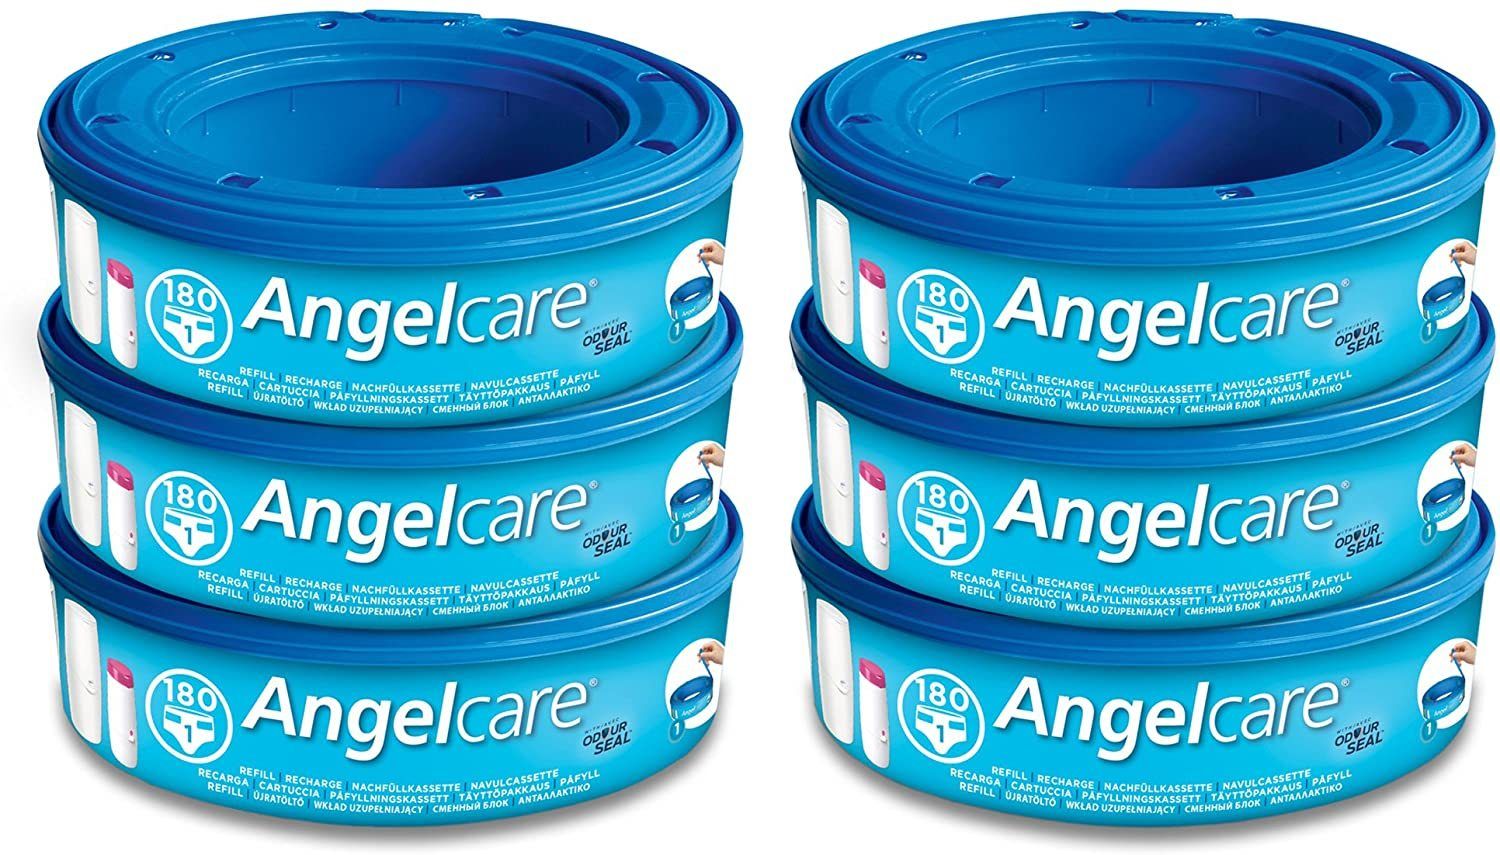 Angelcare Refil Cassettes 3 Pk para lixeira Anne Claire Baby Store 6 Refis 